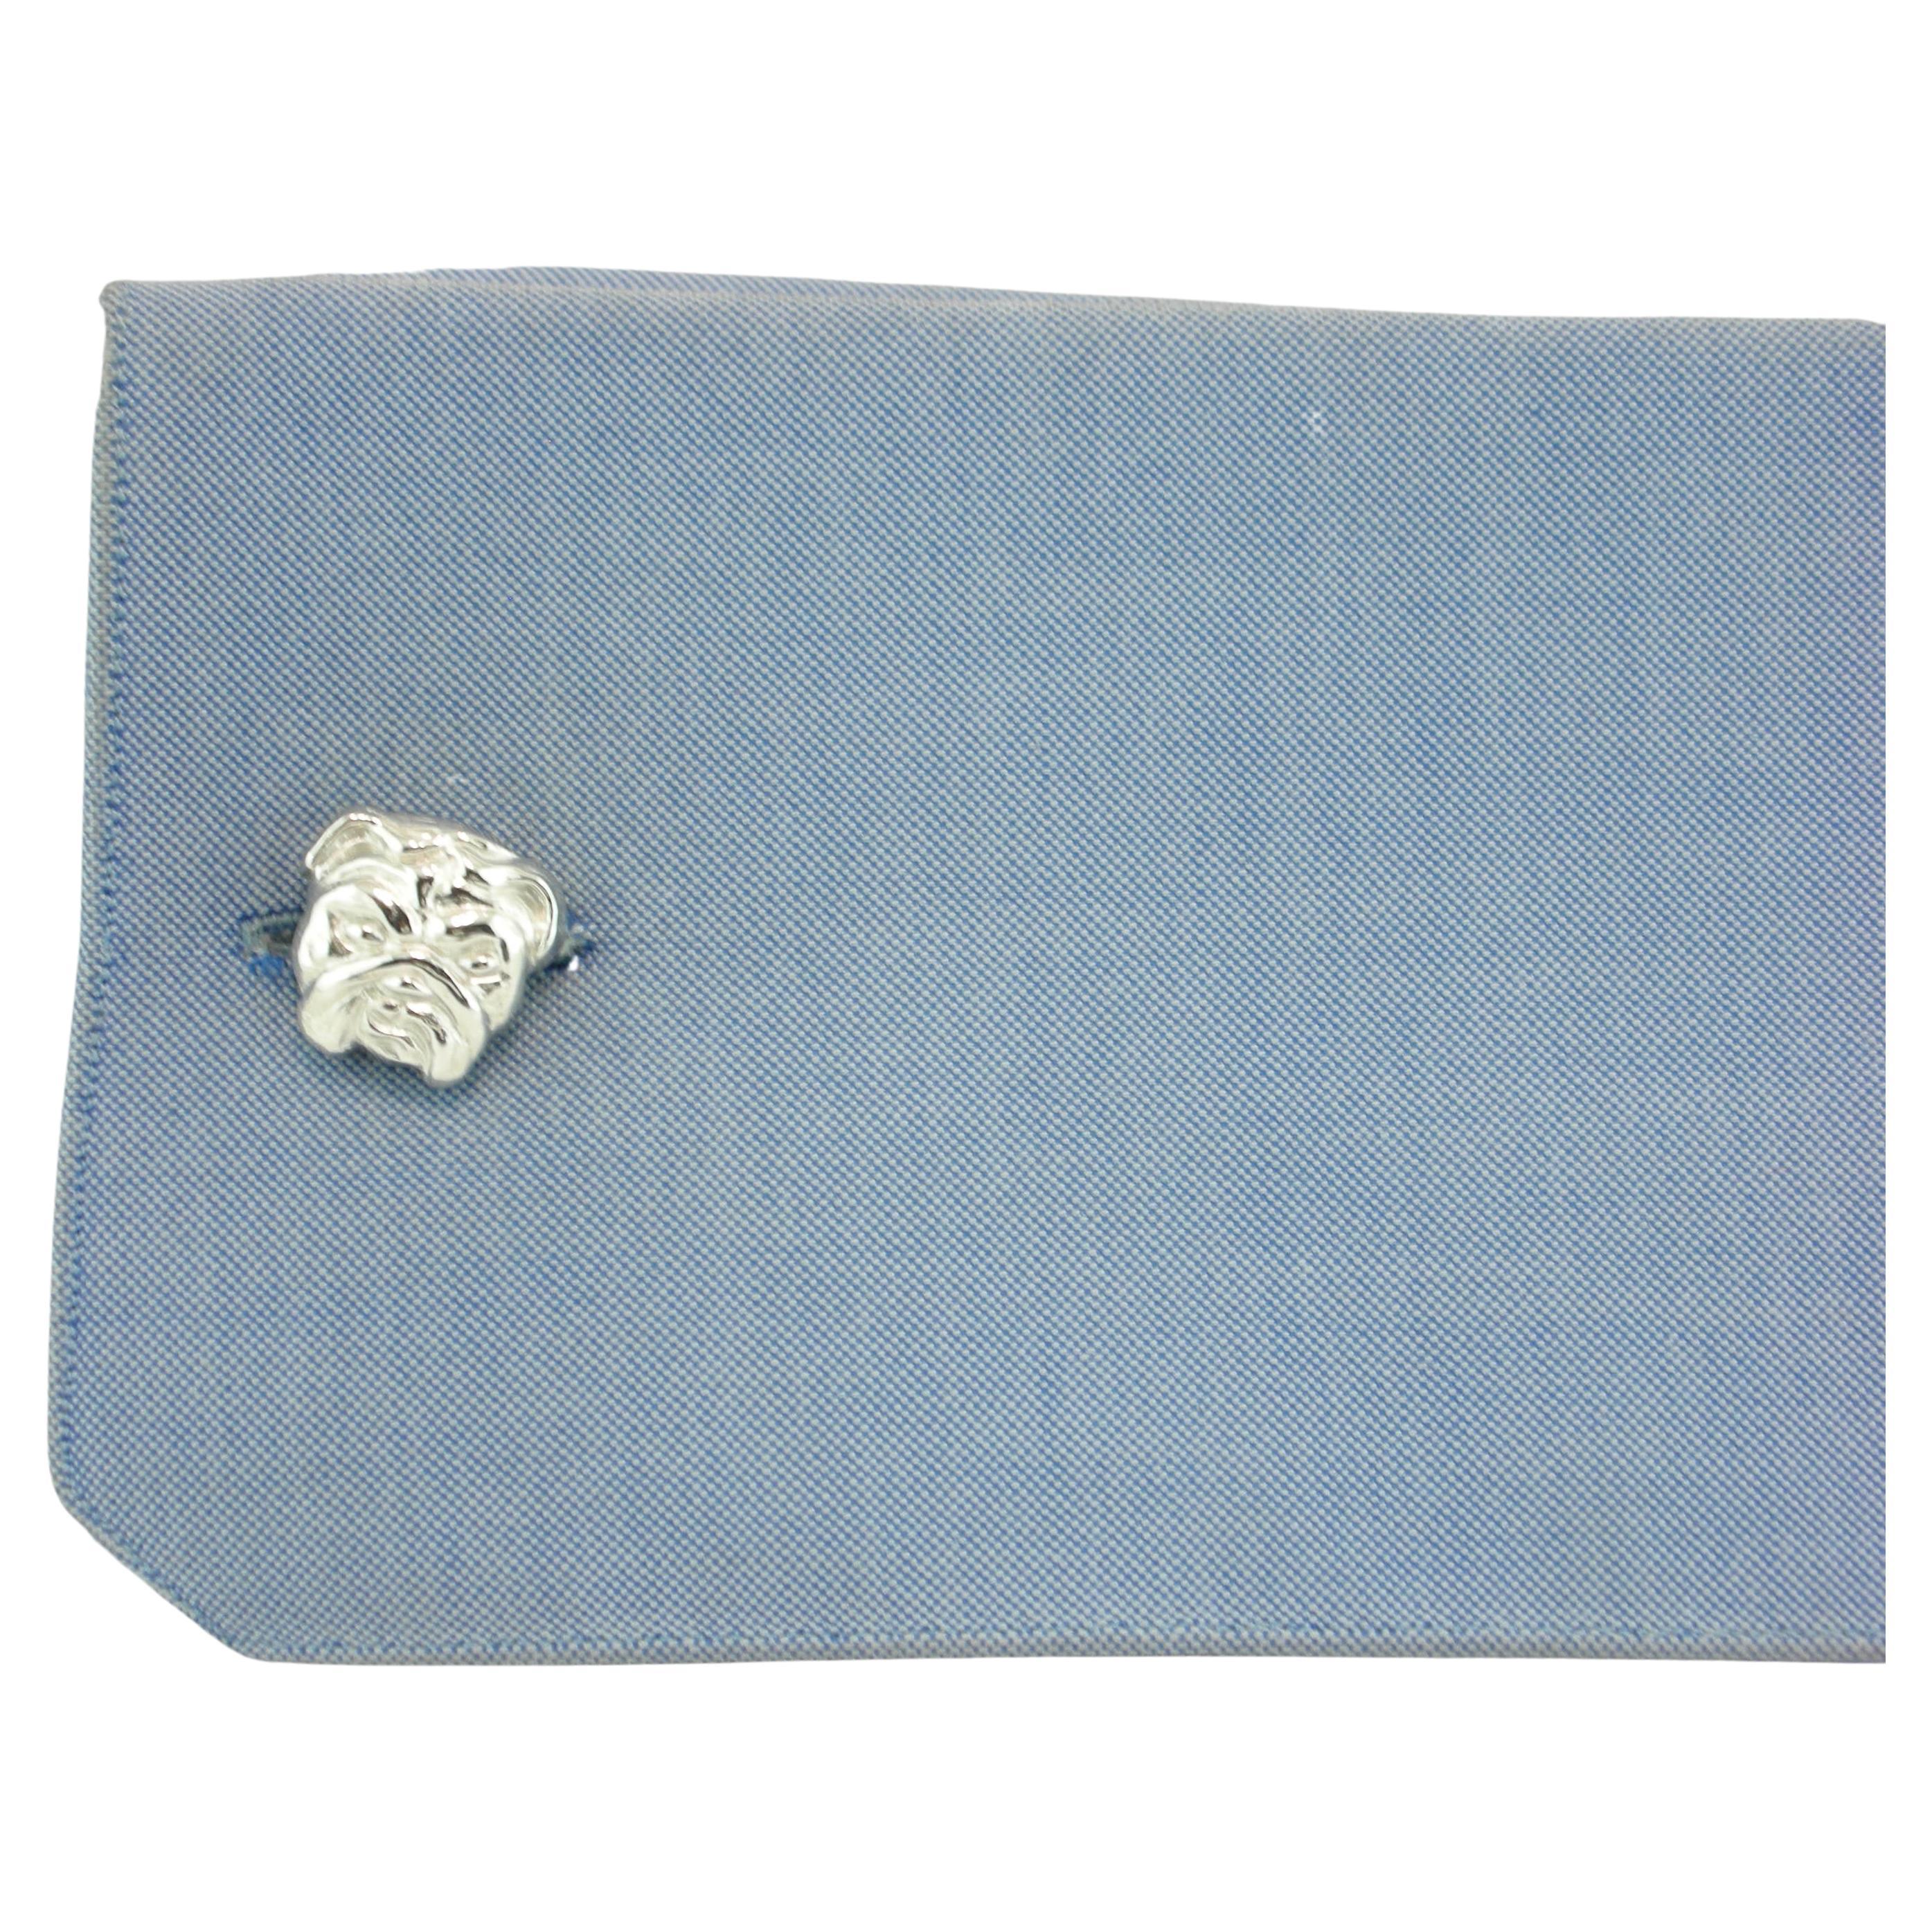 Alex Jona design collection, hand crafted in Italy, Sterling silver Bulldog cufflinks. Marked JONA, 925. 
Alex Jona cufflinks stand out, not only for their special design and for the excellent quality, but also for the careful attention given to